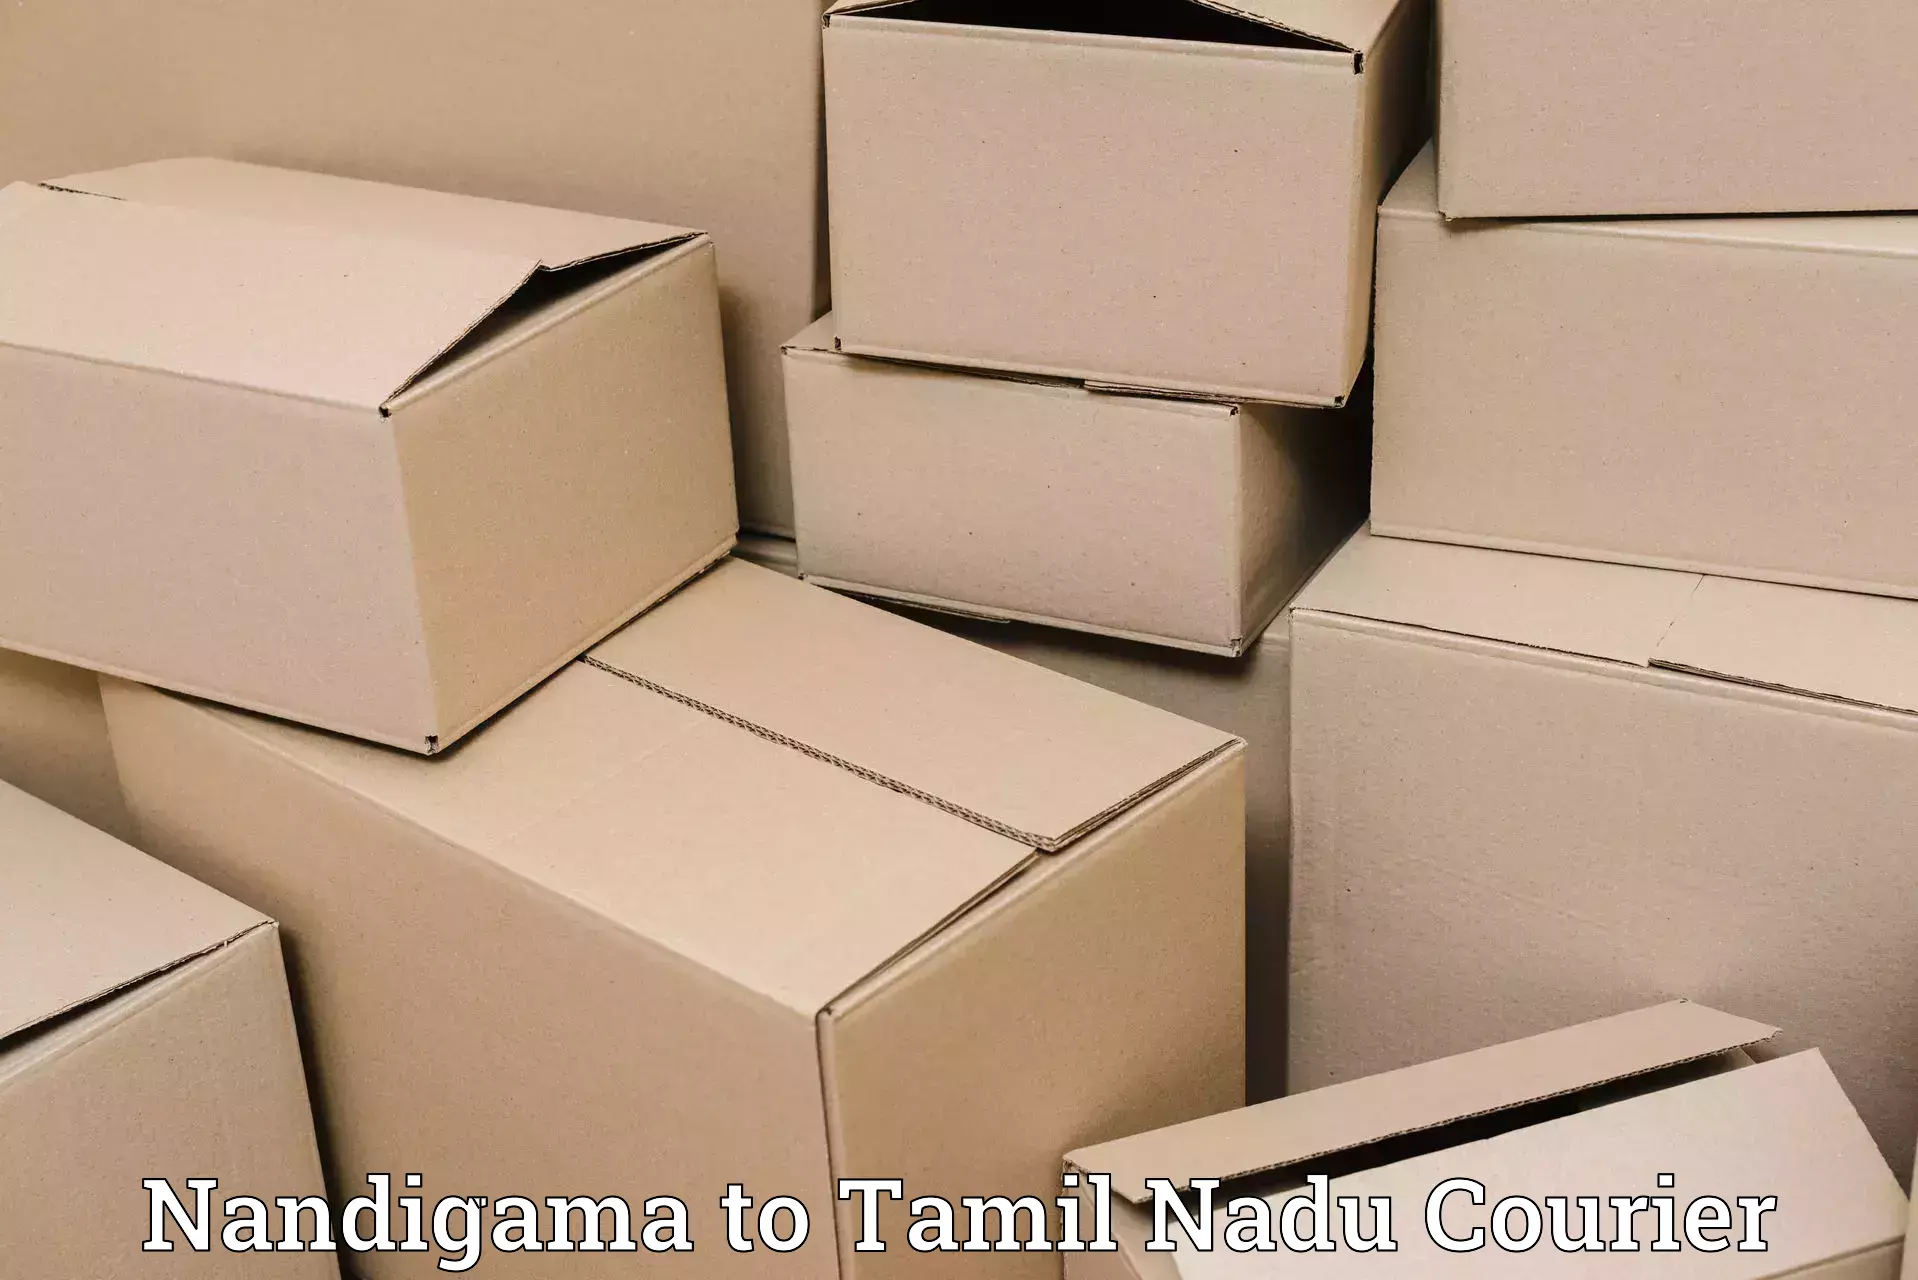 End-to-end delivery Nandigama to Peravurani